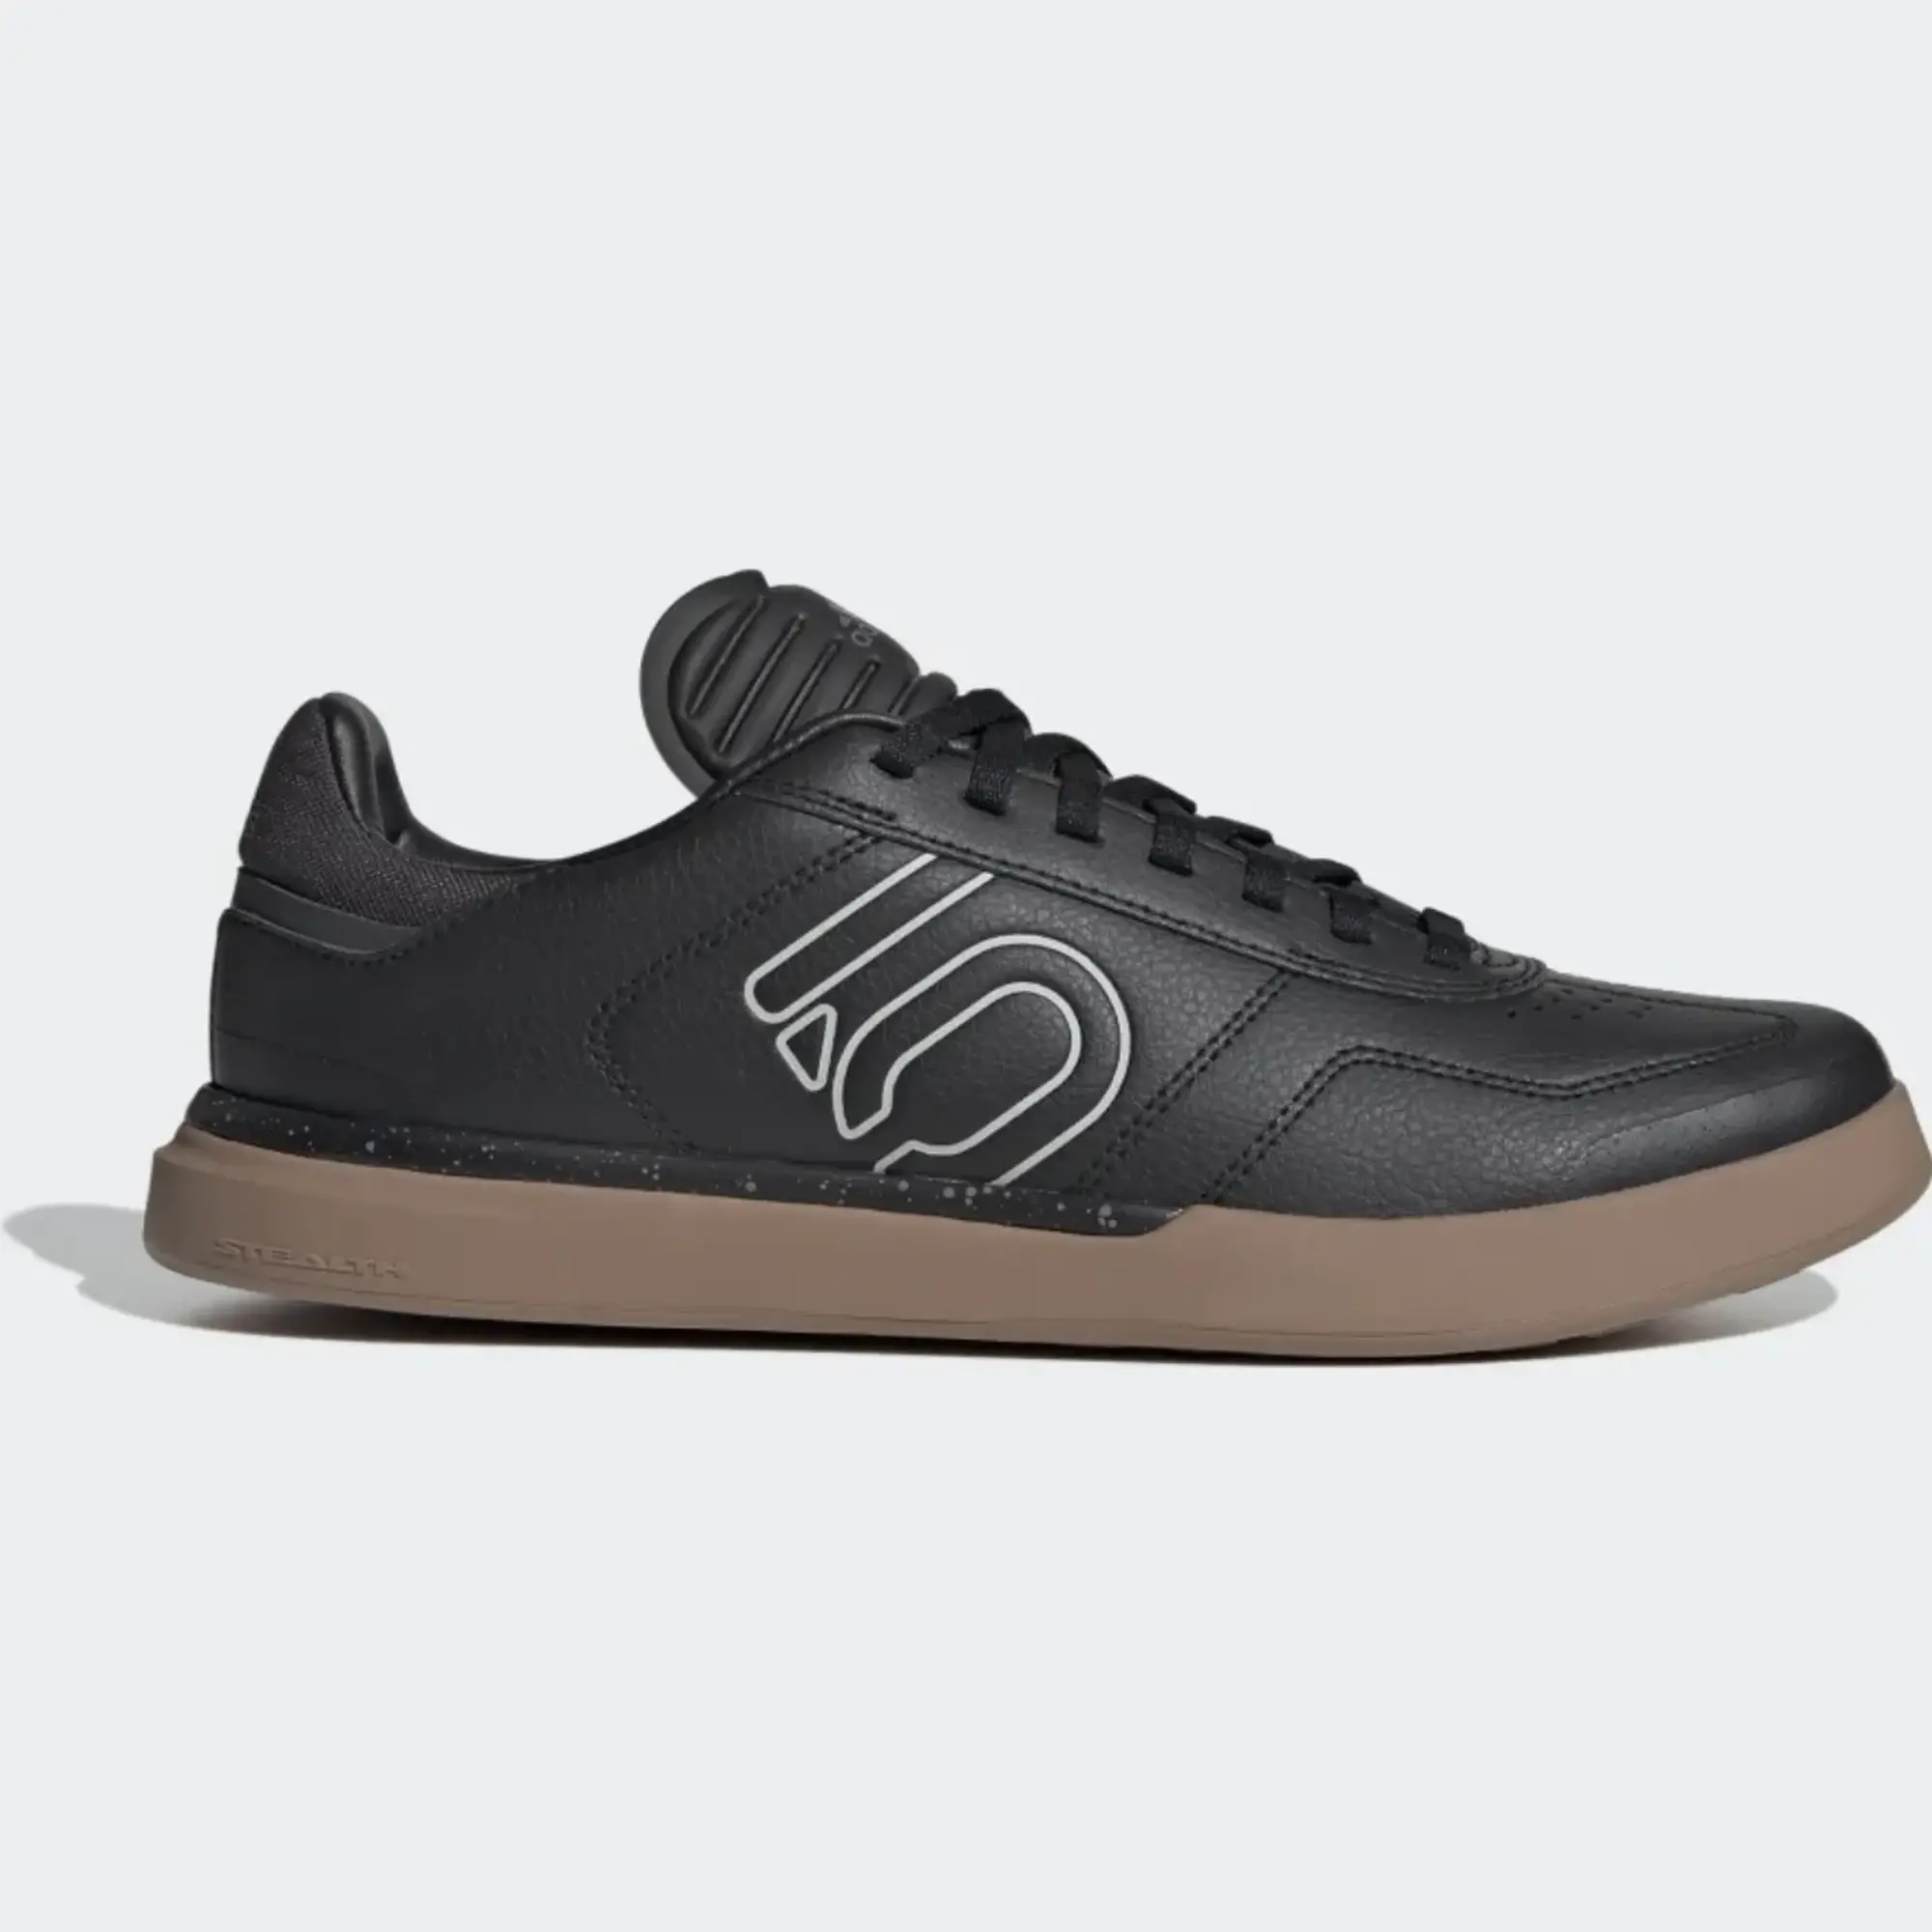 adidas Sleuth Deluxe Womens Trainers - Black